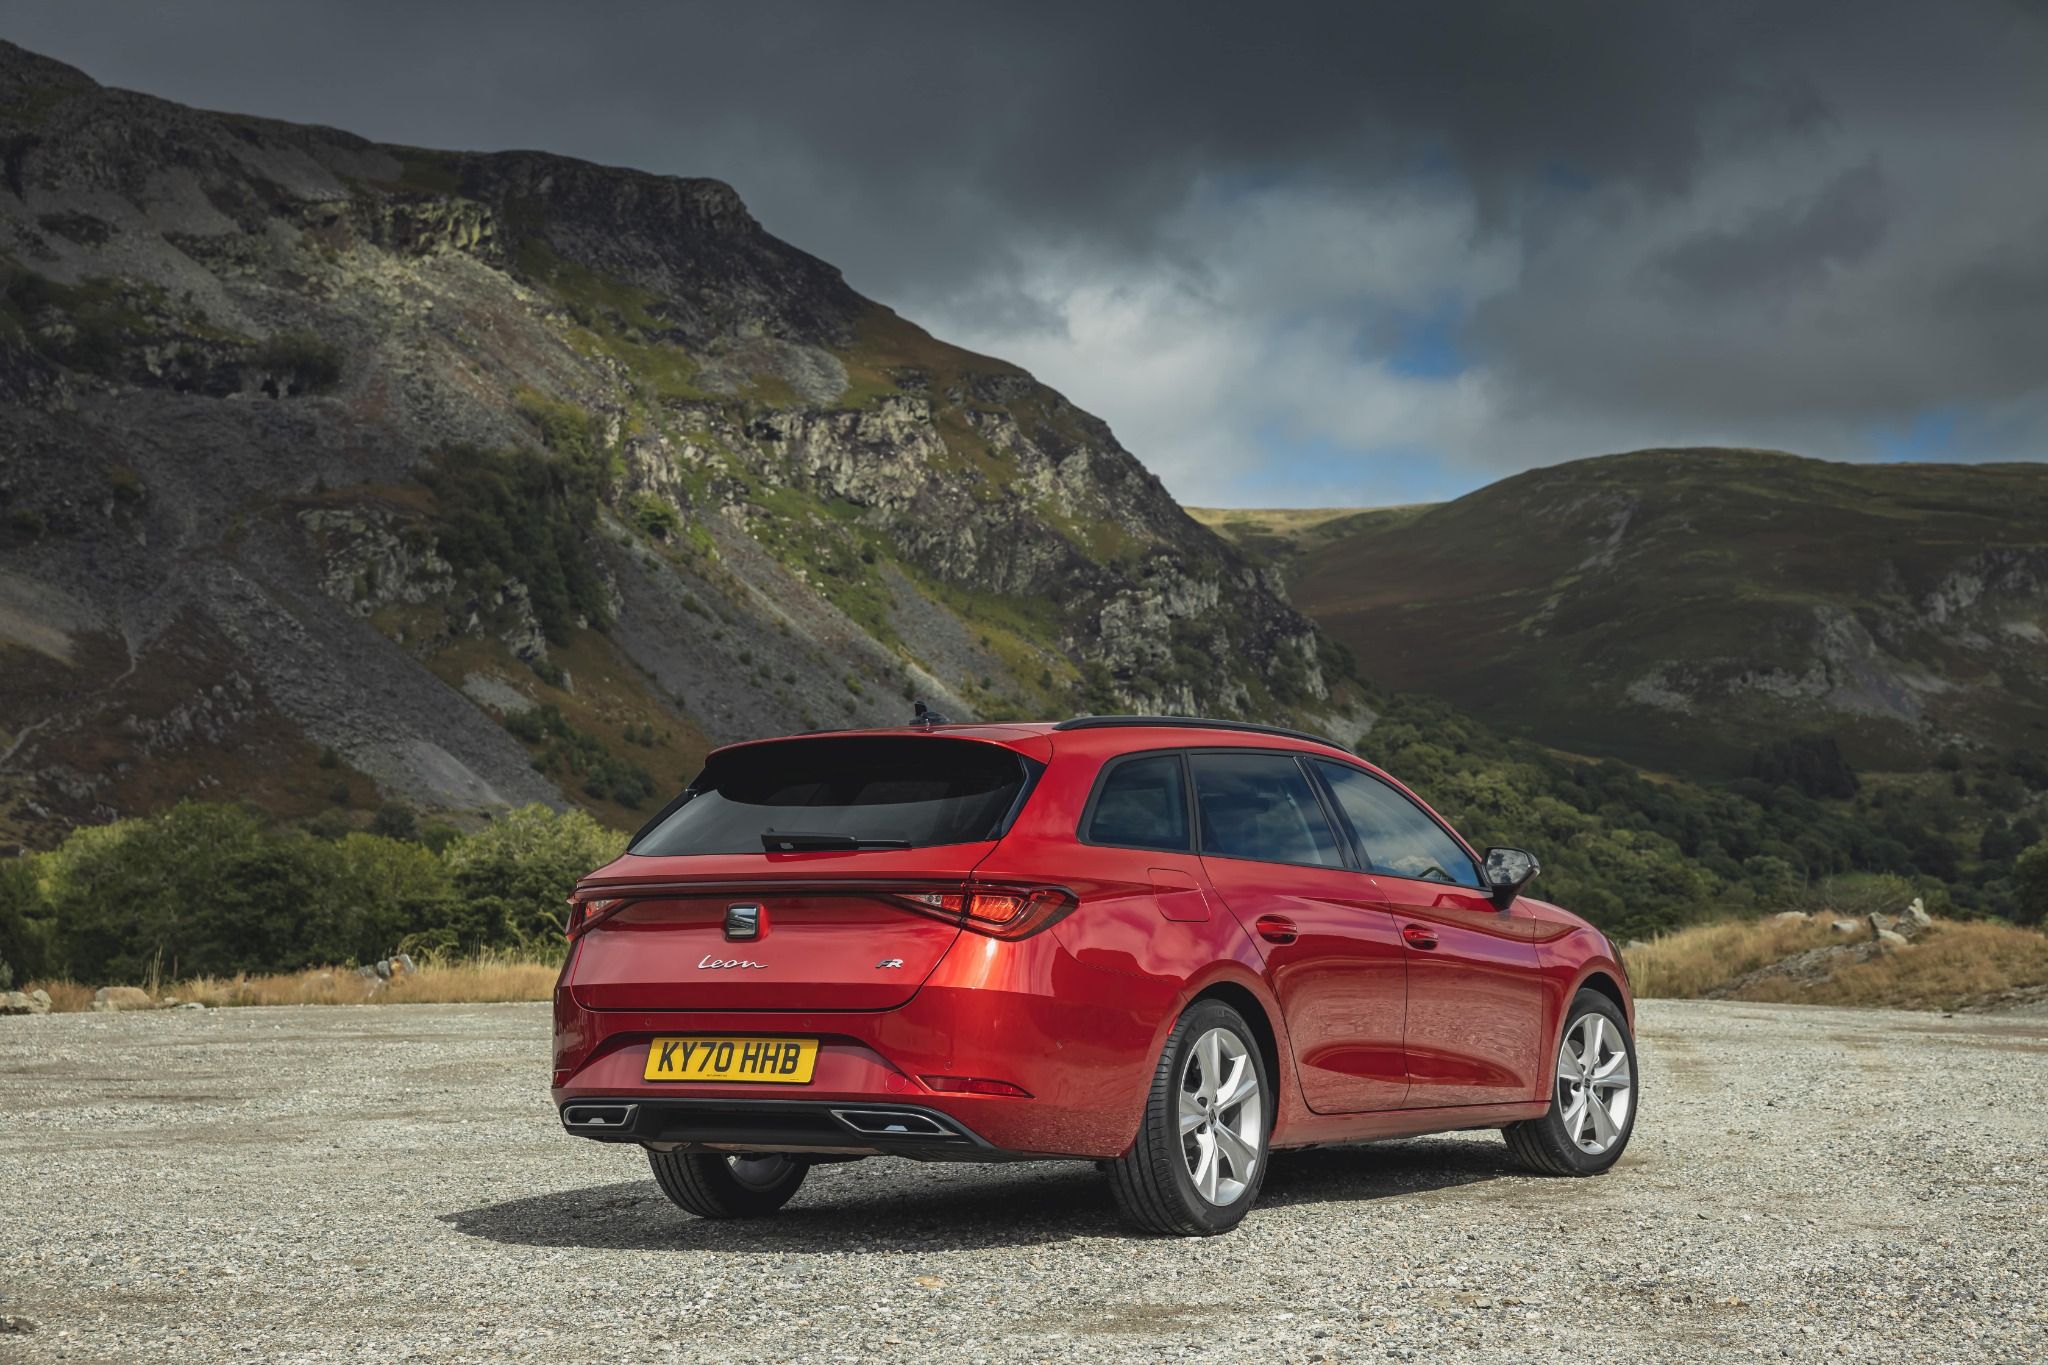 Red SEAT Leon Estate rear parked